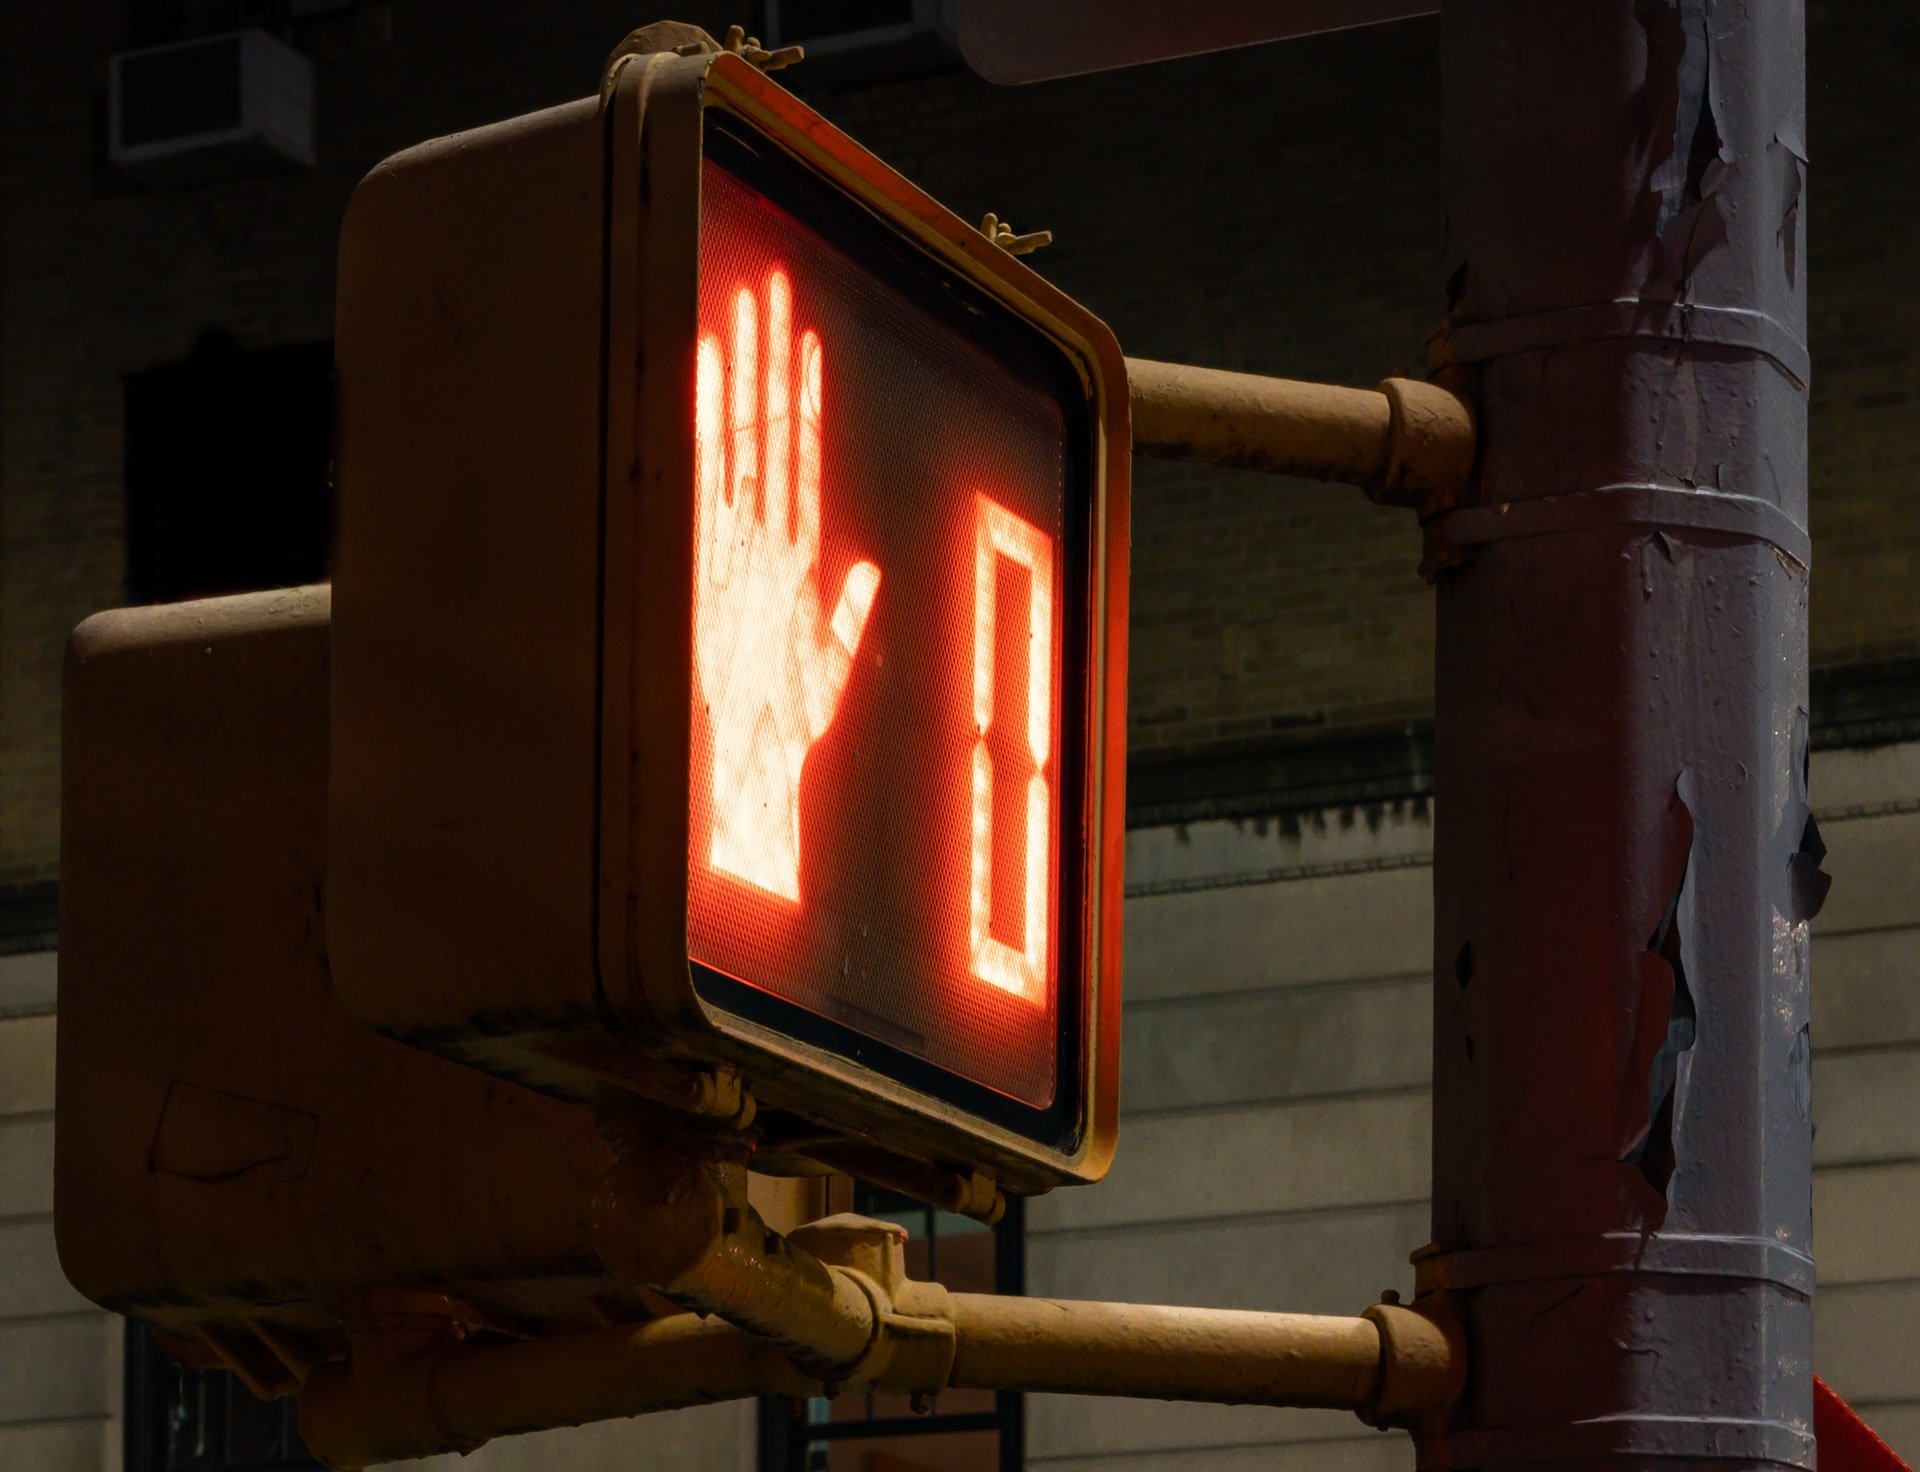 A crosswalk sign at red with a hand indicating 'do not cross'